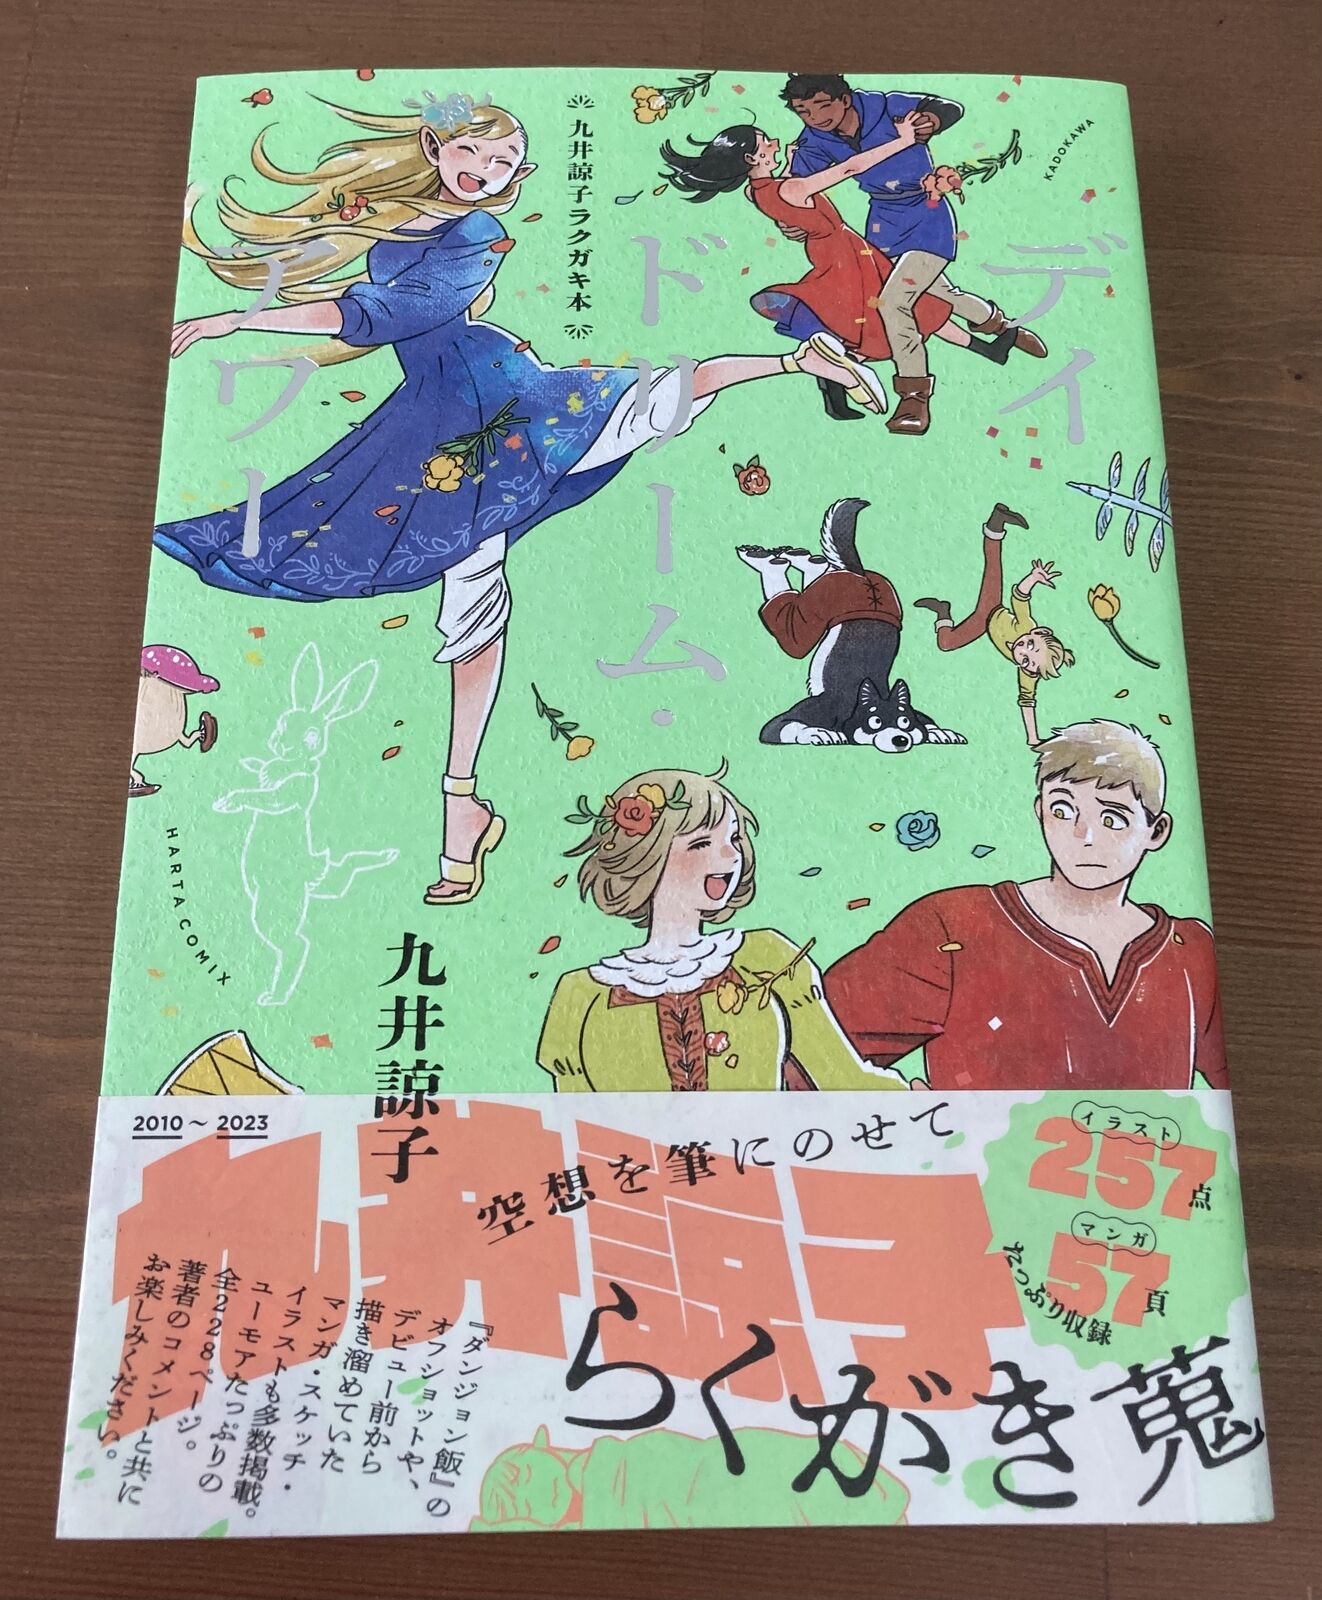 Ryoko Kui Doodle Book Daydream Hour Illustration Art Book Delicious in Dungeon